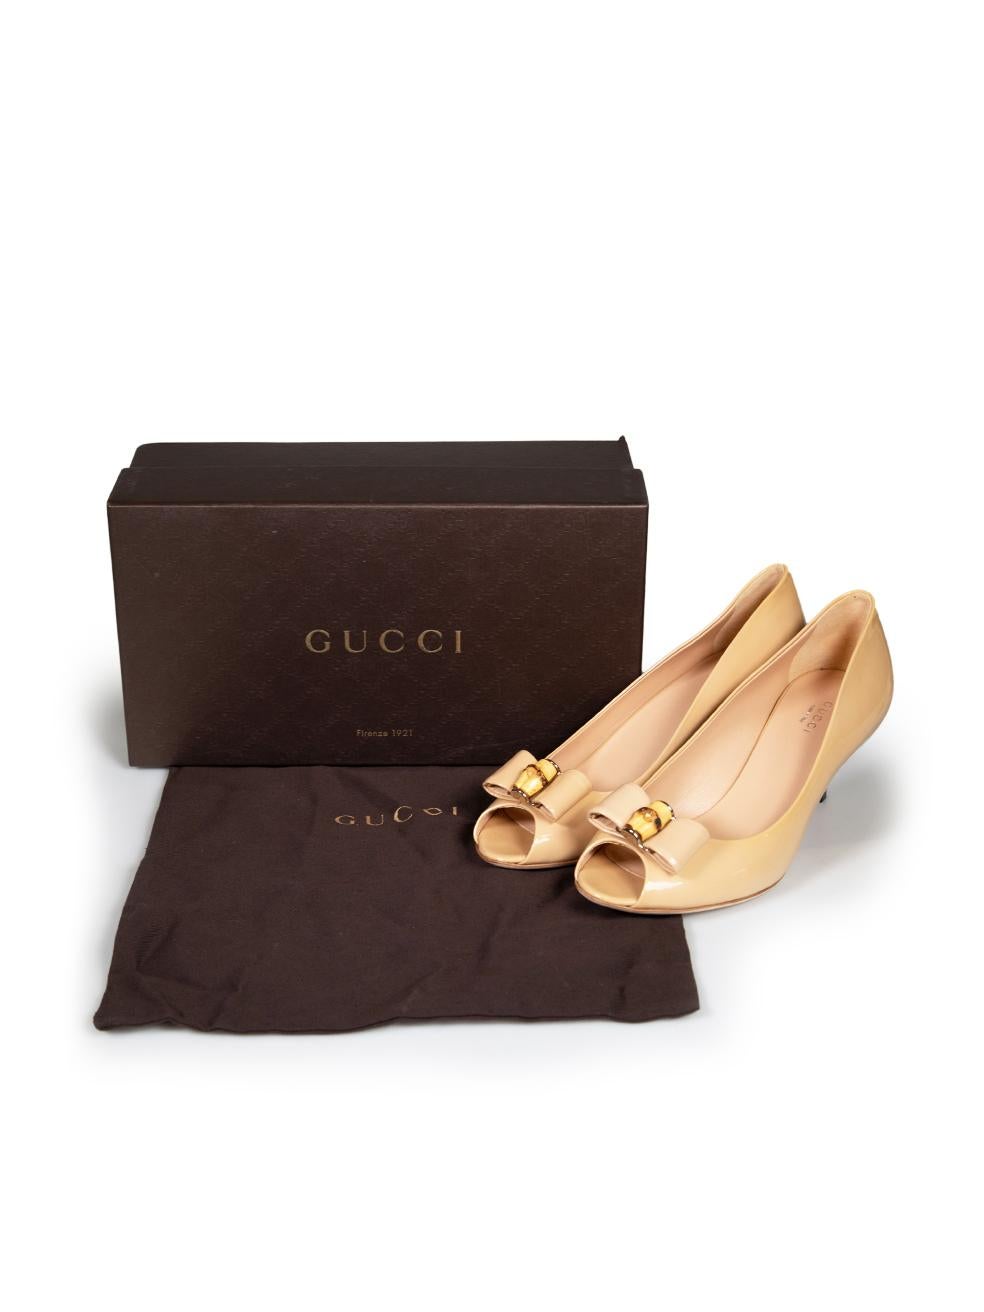 Gucci Beige Patent Leather Bamboo Accent Heels Size IT 38 For Sale 2